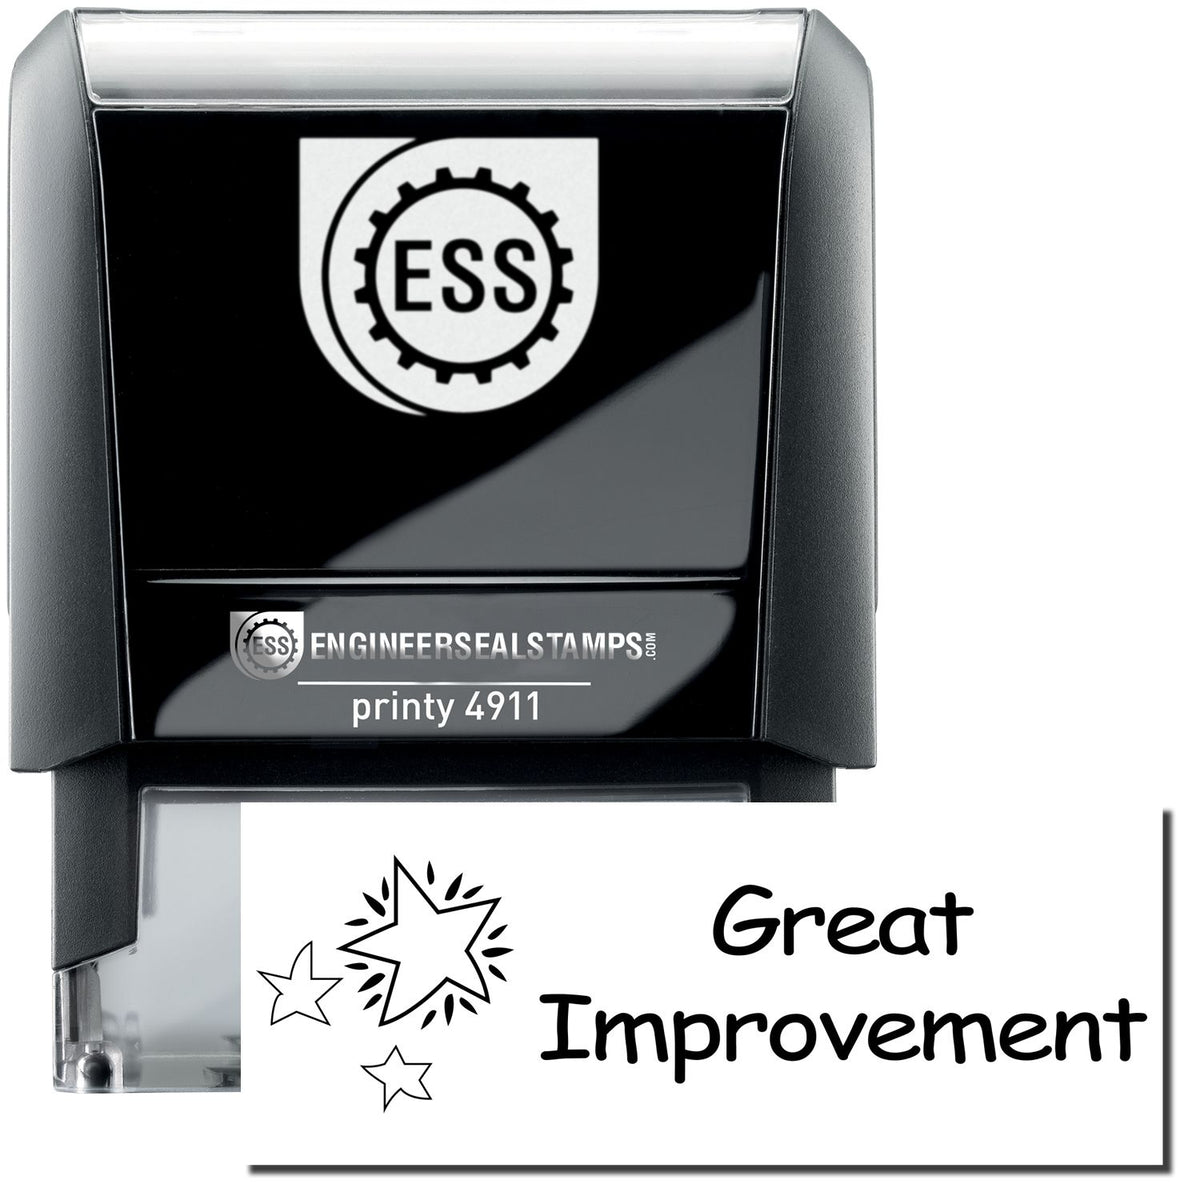 A self-inking stamp with a stamped image showing how the text &quot;Great Improvement&quot; in a whimsical font with a trio of stars on the left side is displayed after stamping.